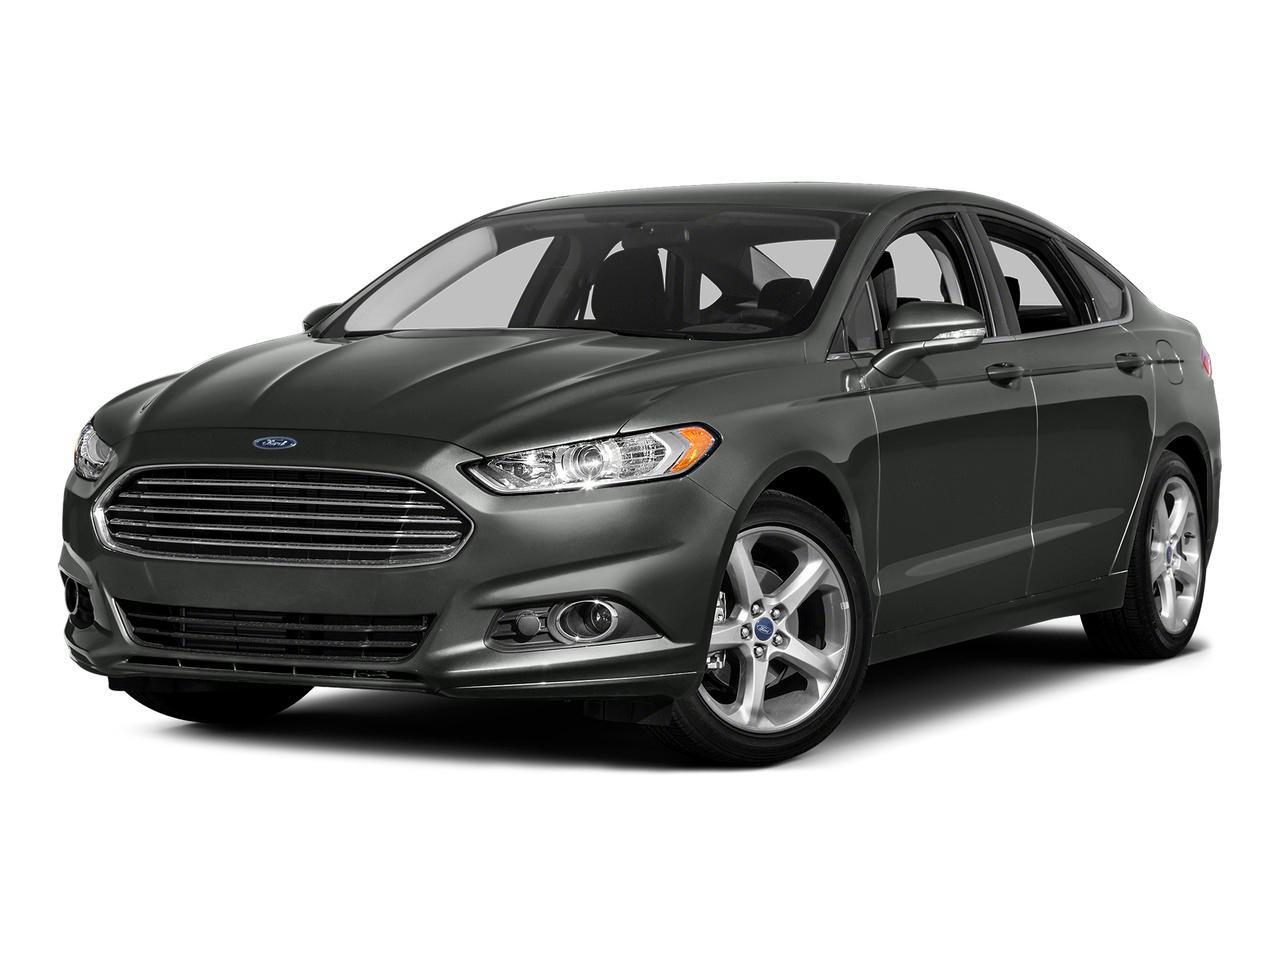 Used 2016 Ford Fusion 4dr Sdn Se Fwd Gray For Sale In Jamestown Nd Wilhelm Chevrolet Buick Gmc